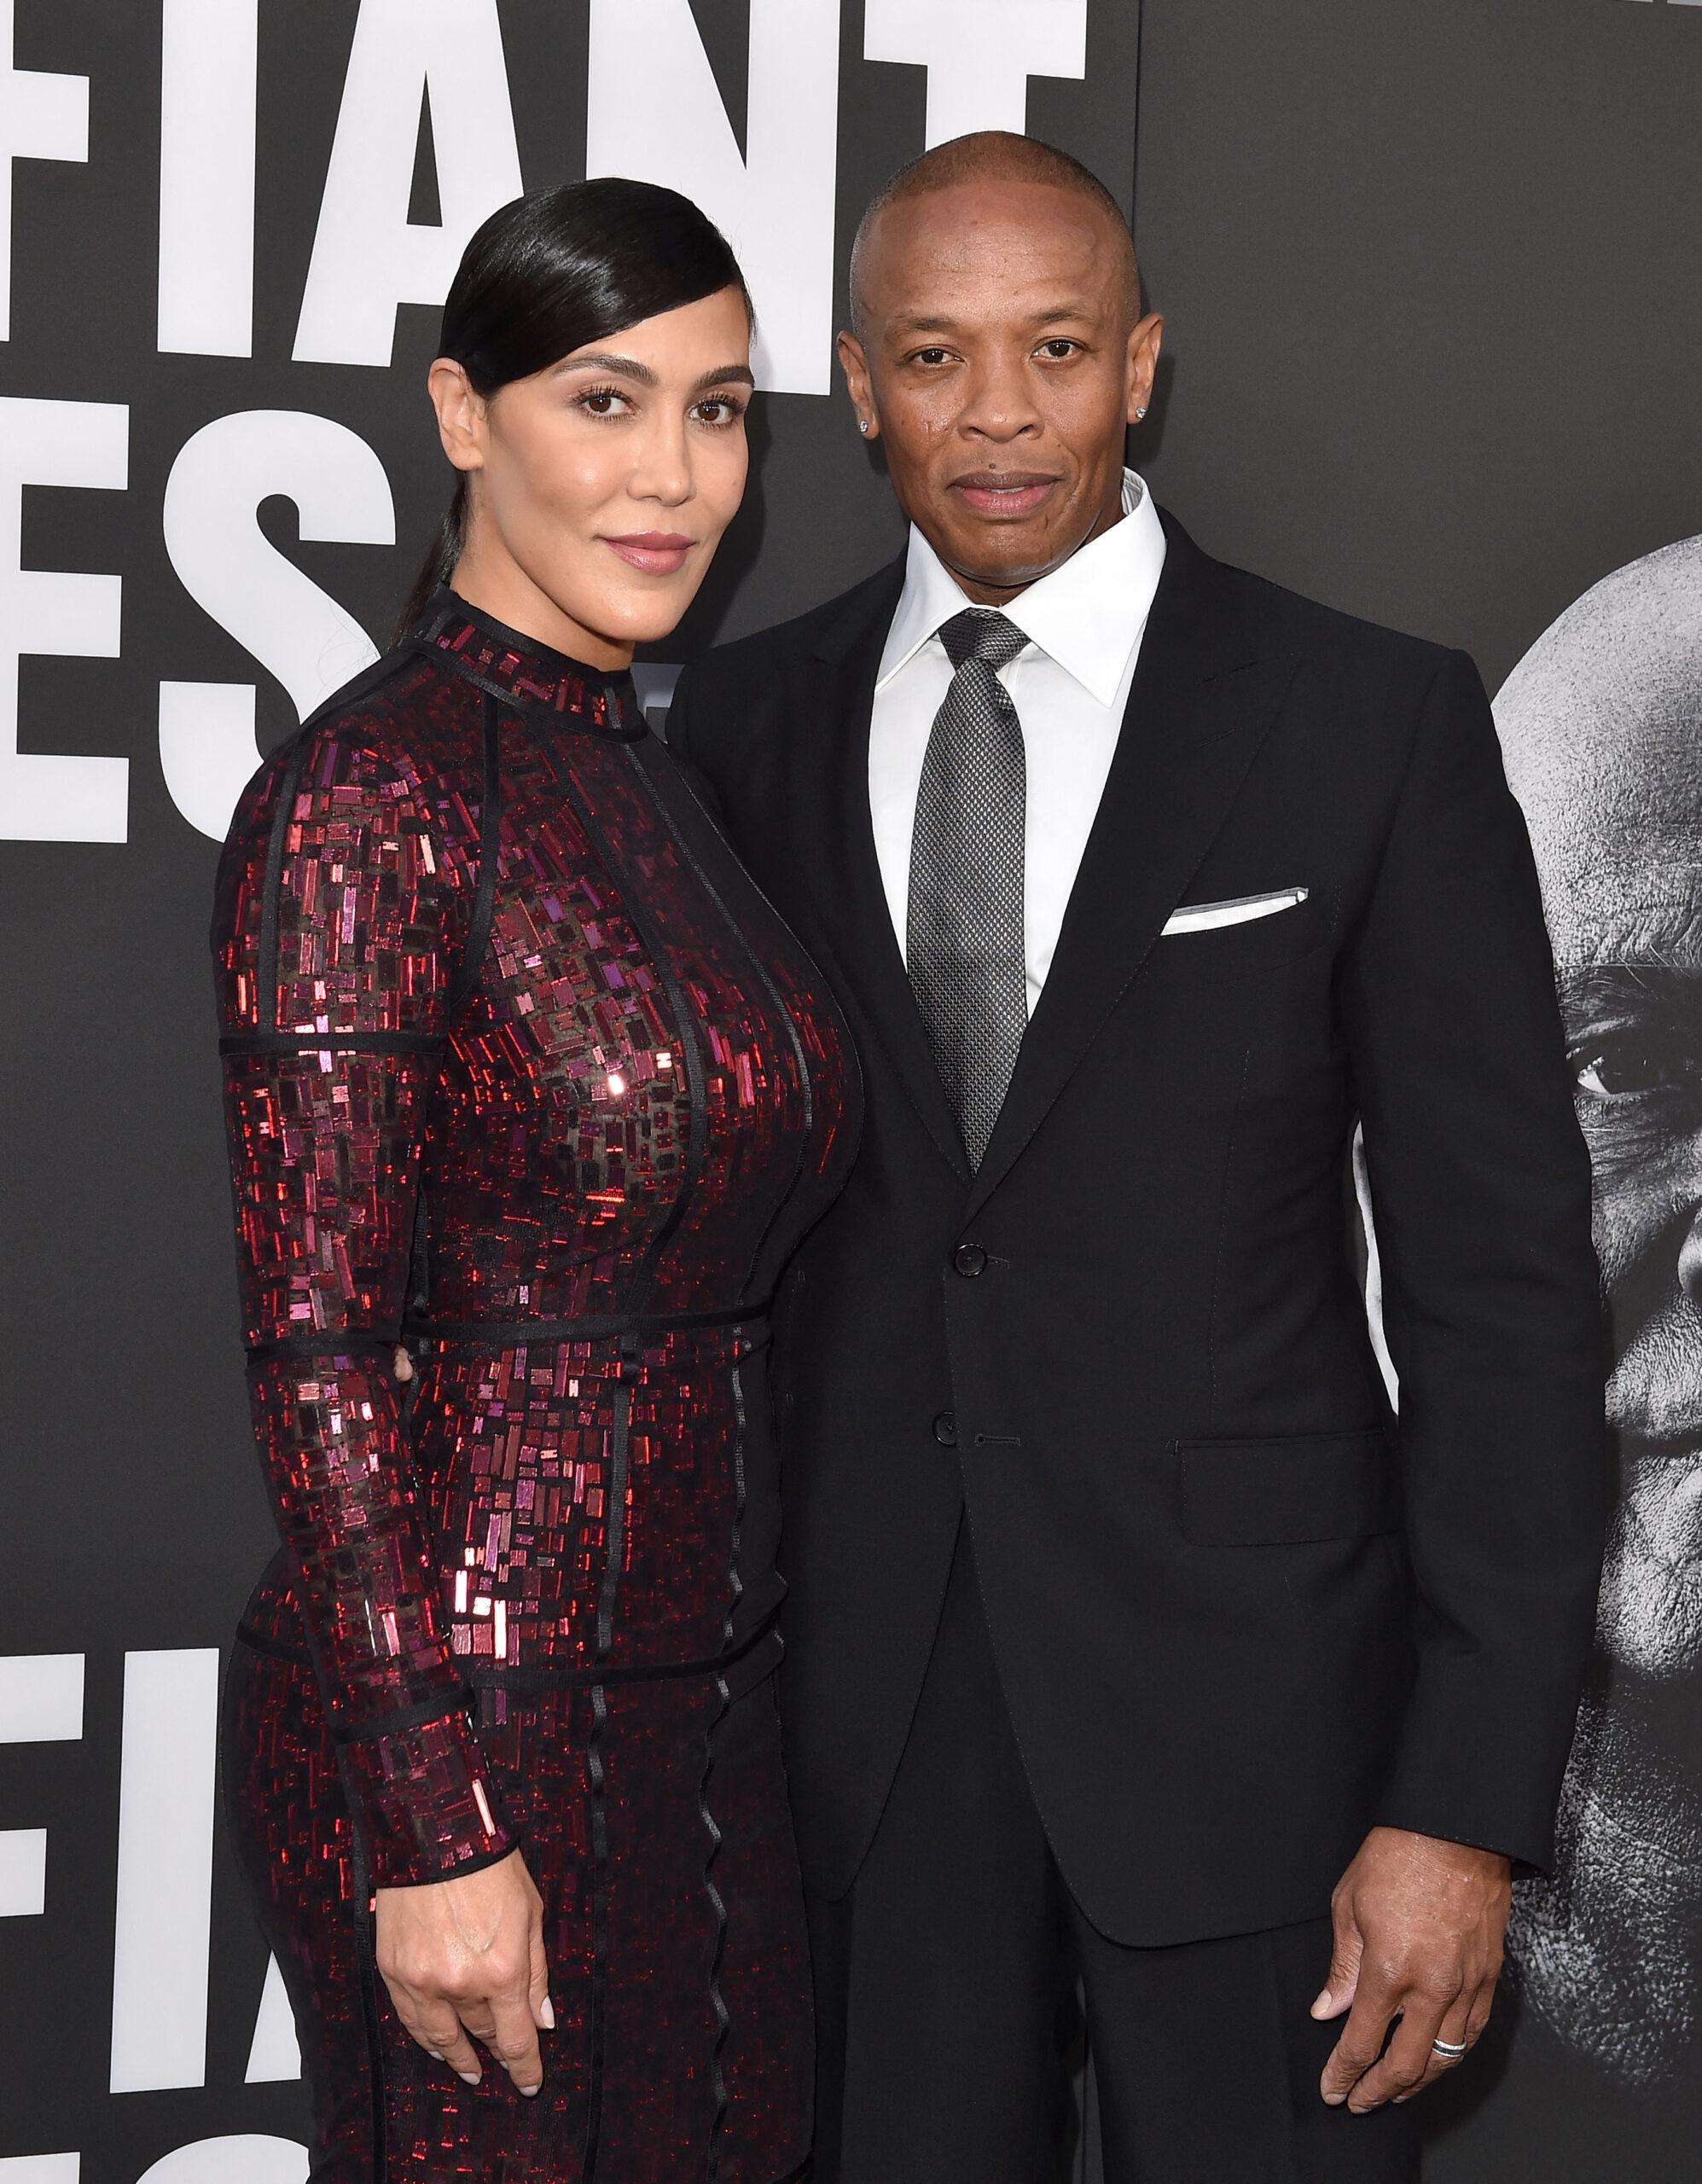 Nicole Young and Dr. Dre at "The Defiant Ones" Premiere in LA